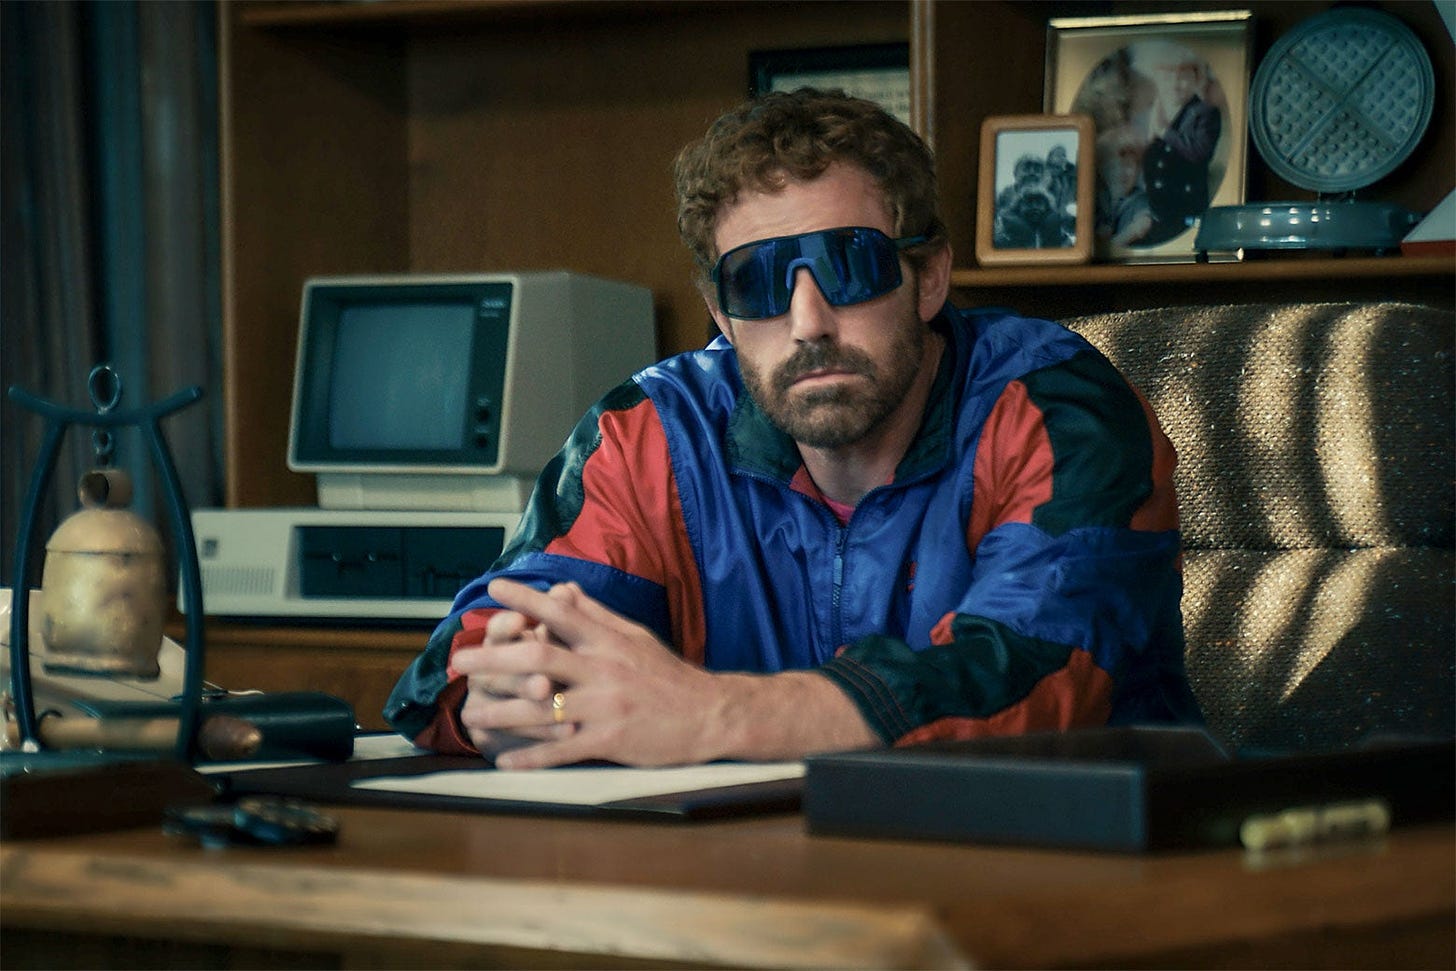 Ben Affleck as Phil Knight in Air. He has curly hair, is wearing big, wraparound sunglasses and a windbreaker.